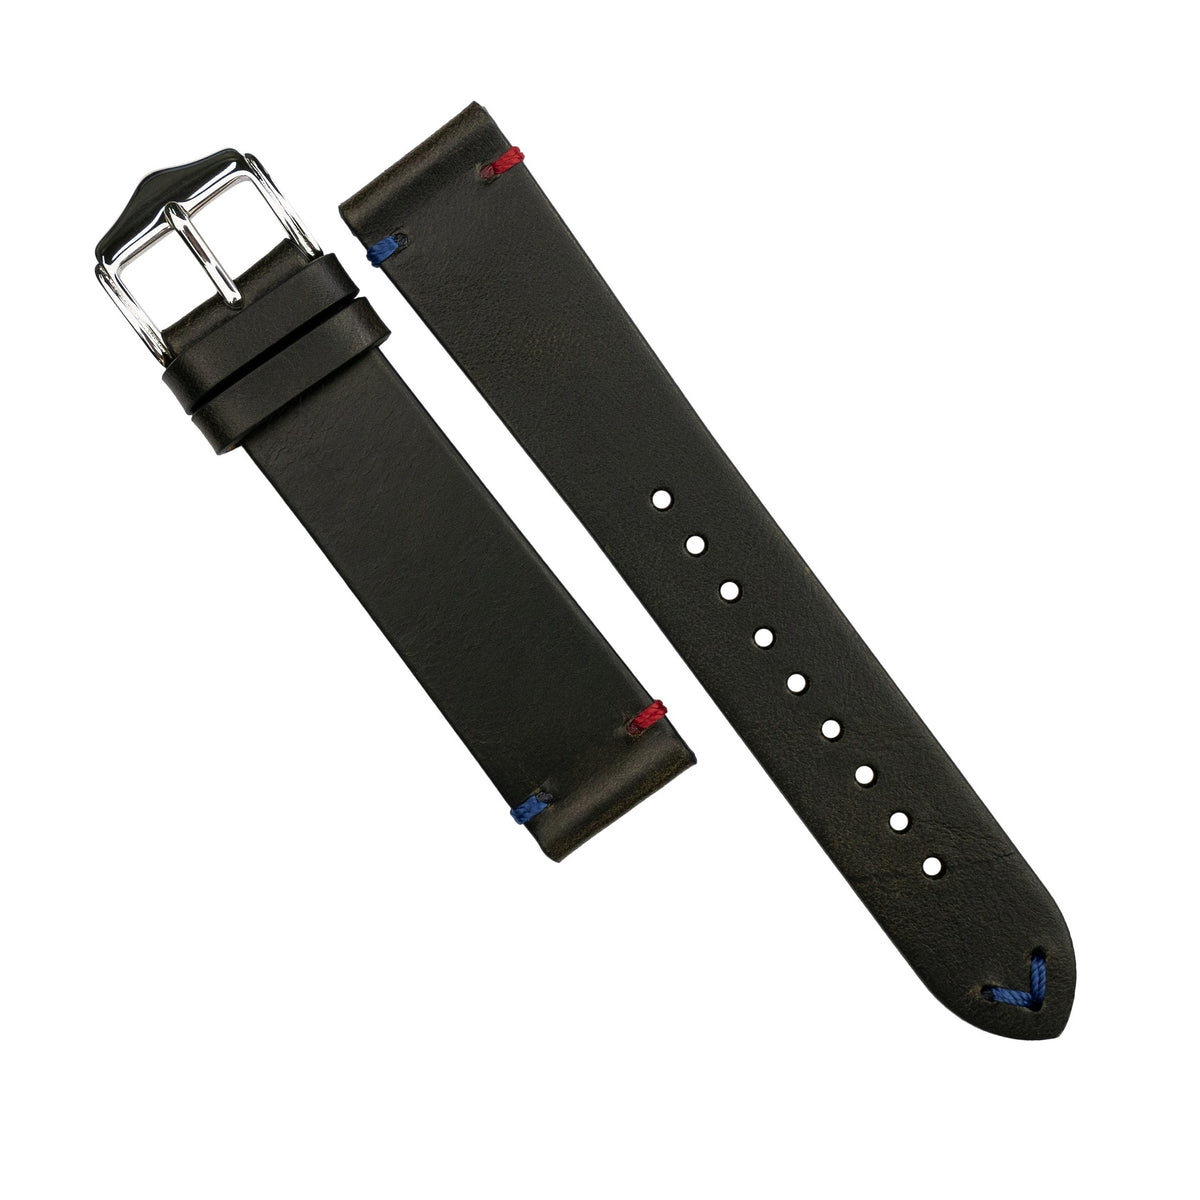 Premium Vintage Oil Waxed Leather Watch Strap in Black - Pepsi (20mm) - Nomad Watch Works SG